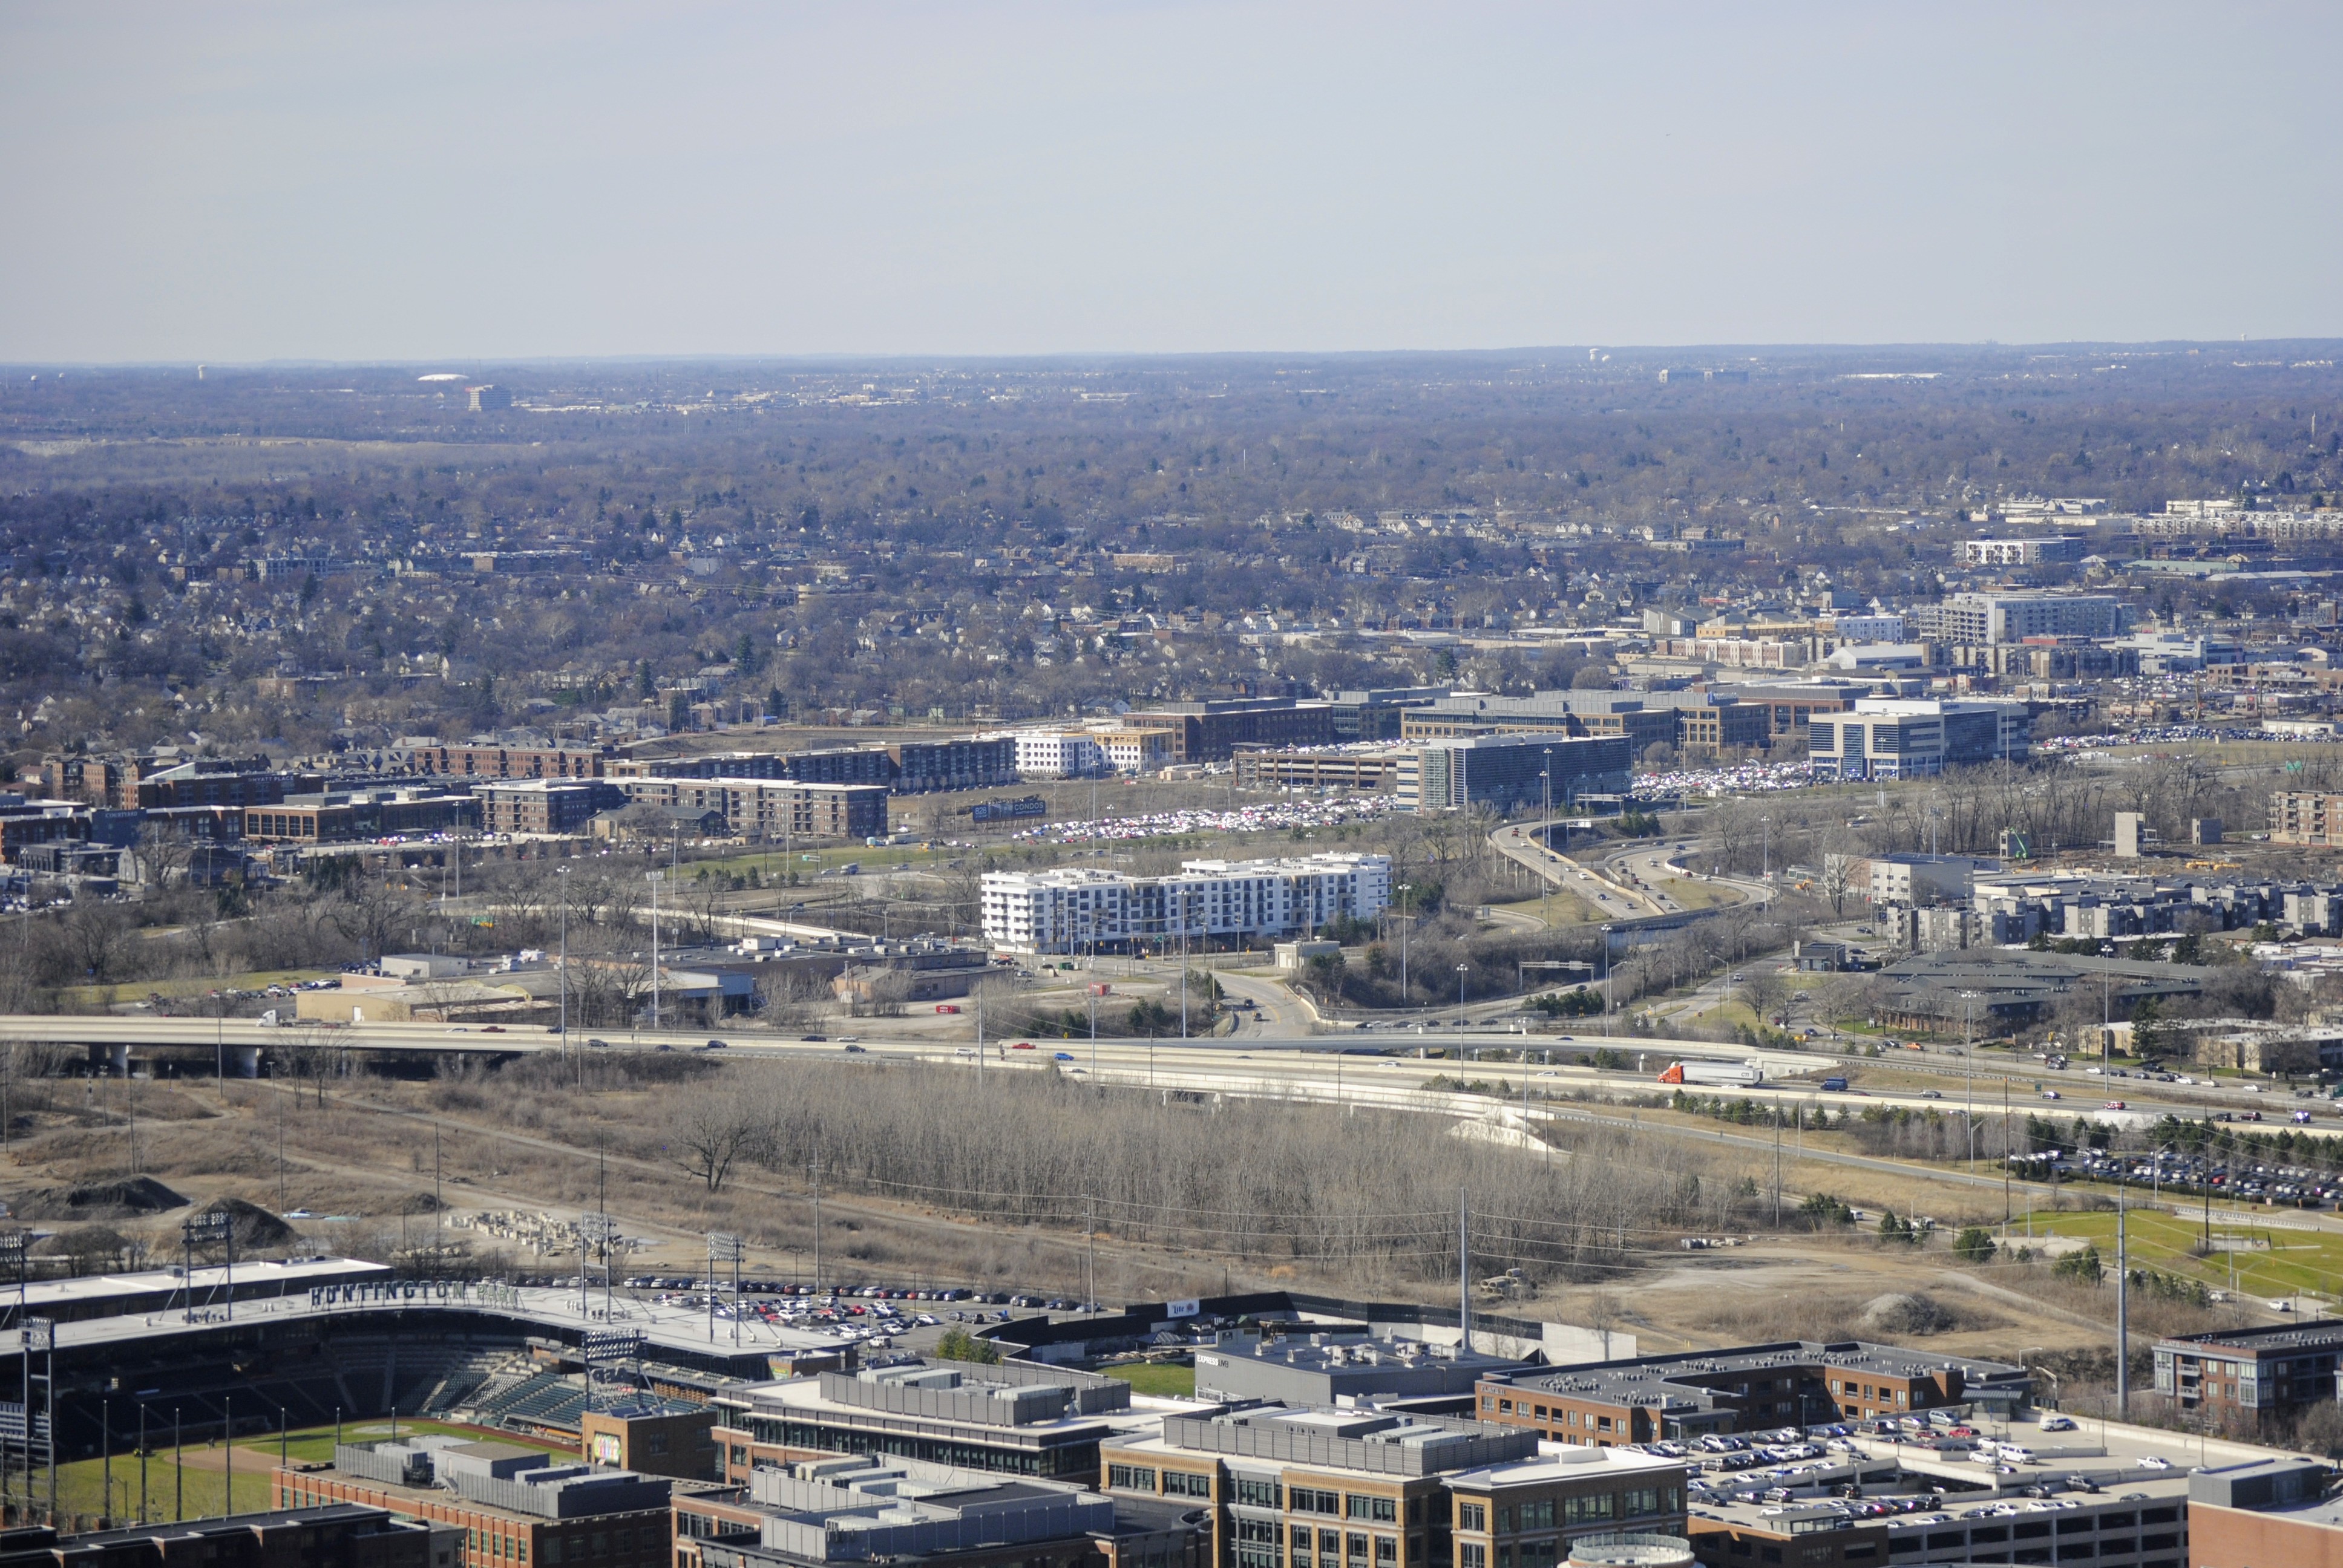 View of the Short North/Campus area from Rhodes Tower : r/Columbus